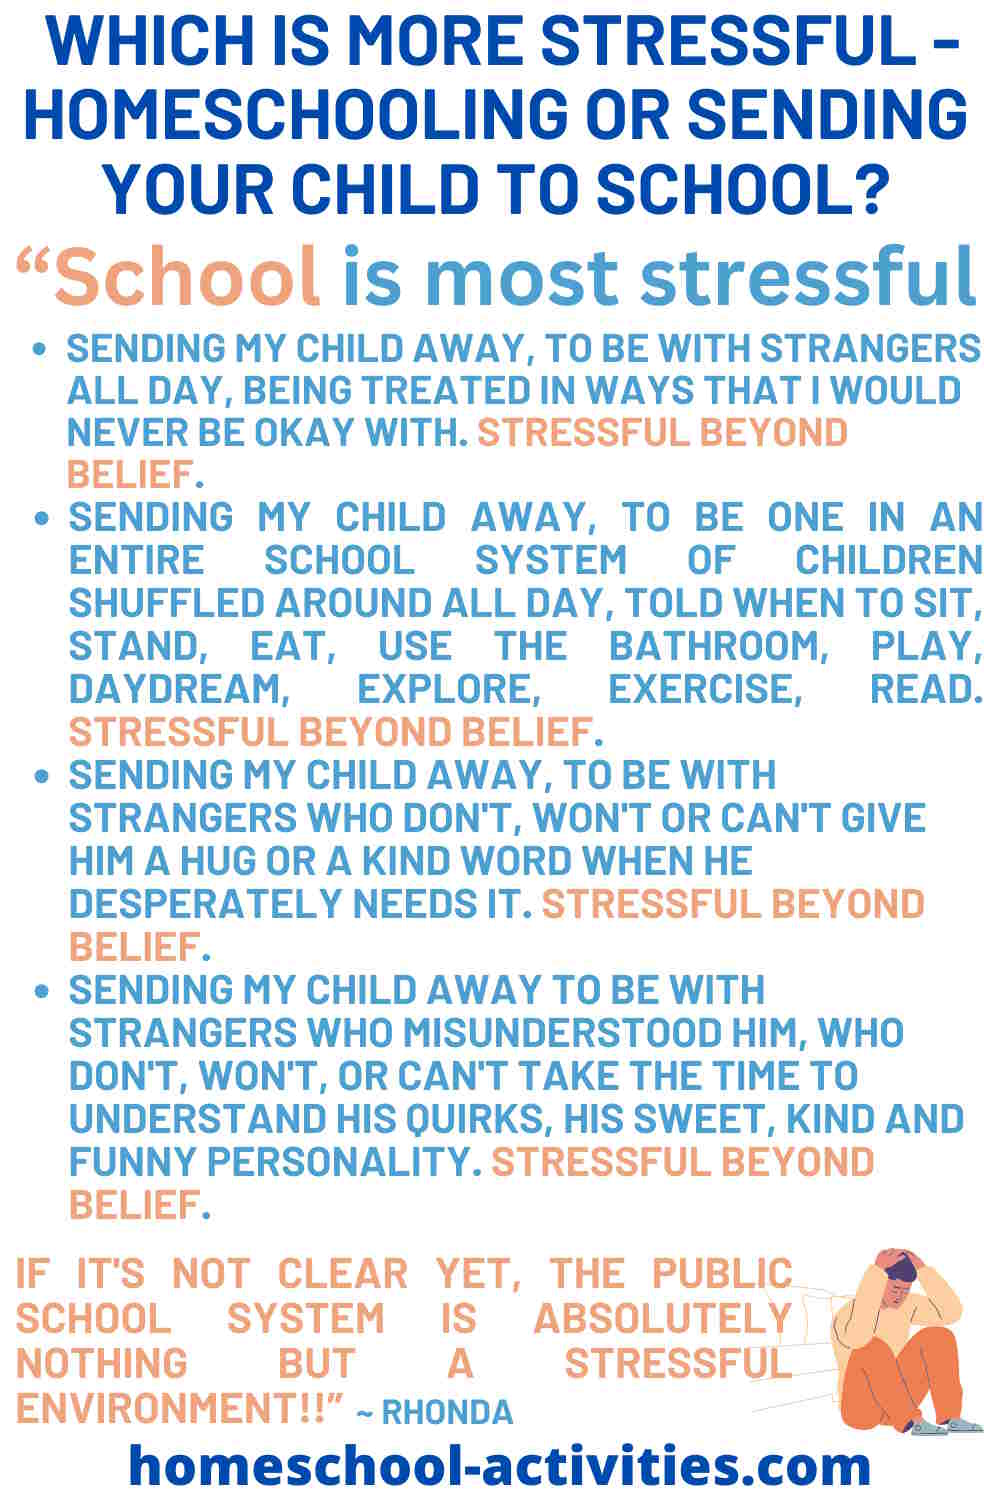 School is more stressful than homeschooling